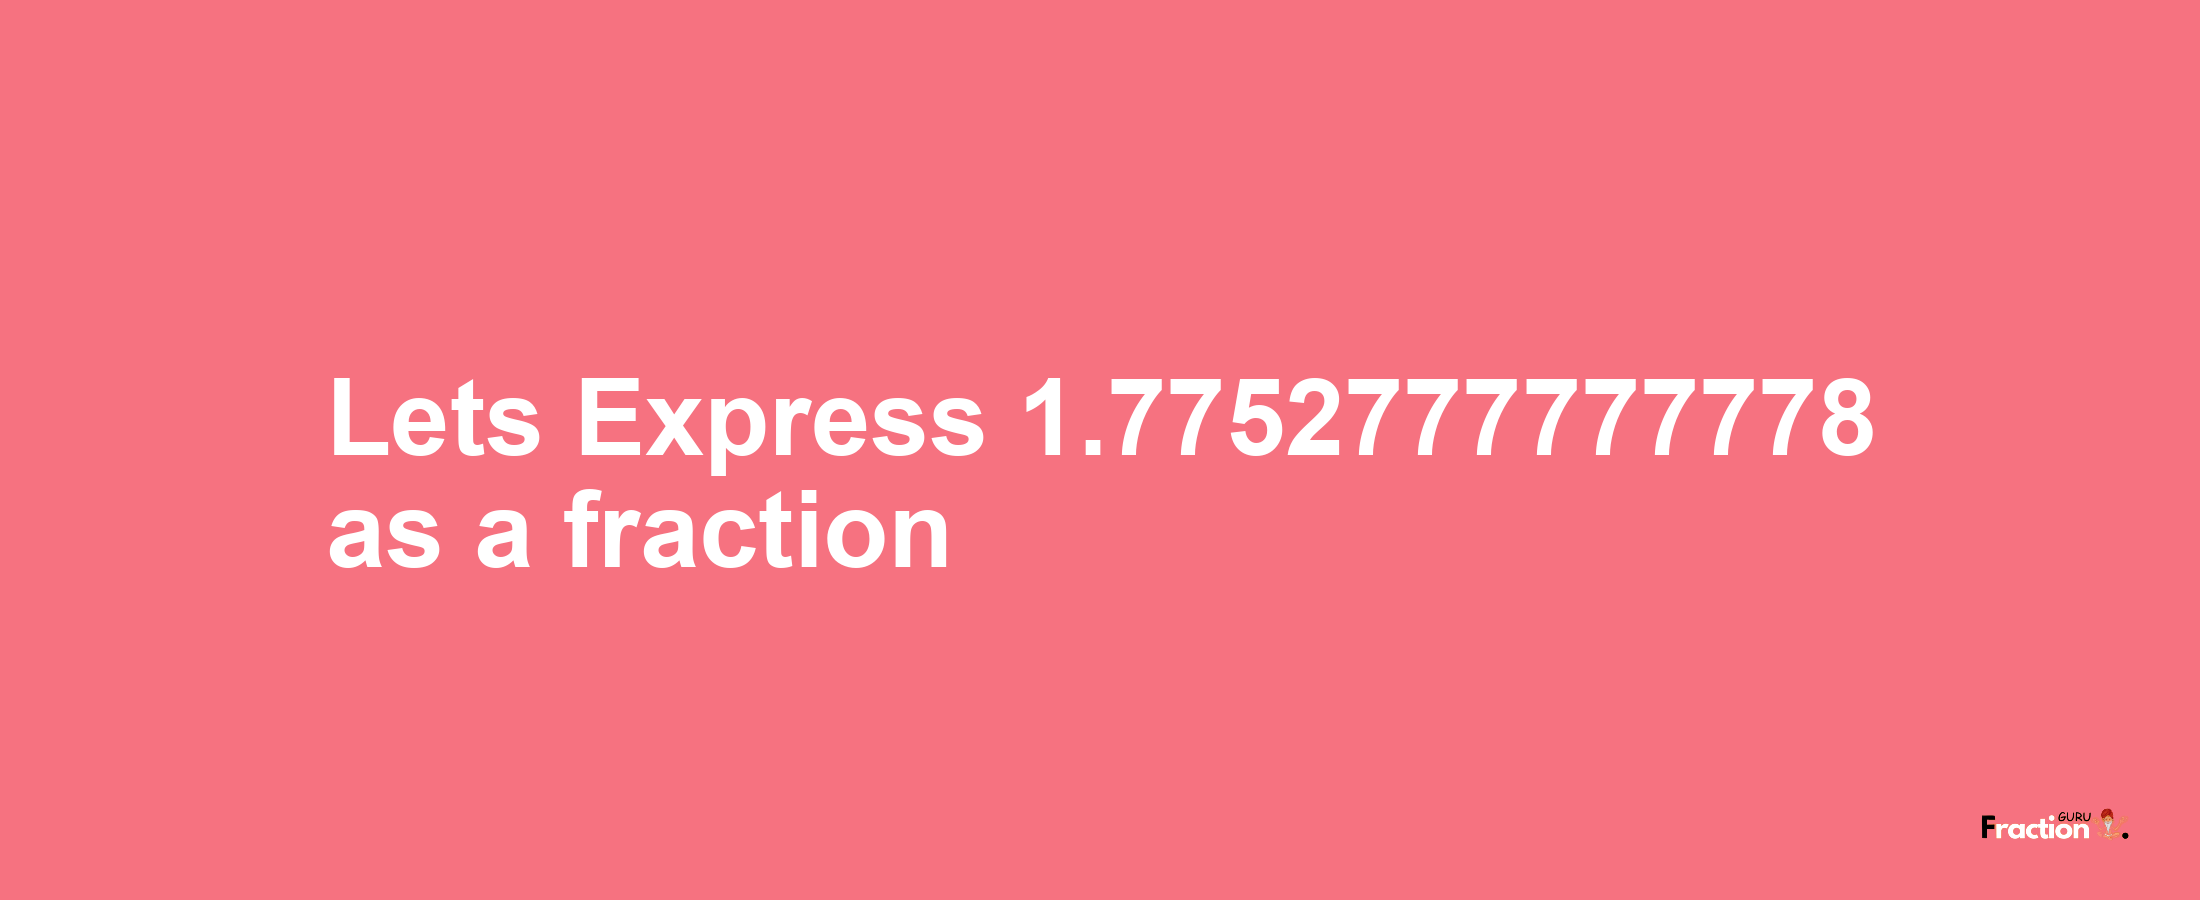 Lets Express 1.7752777777778 as afraction